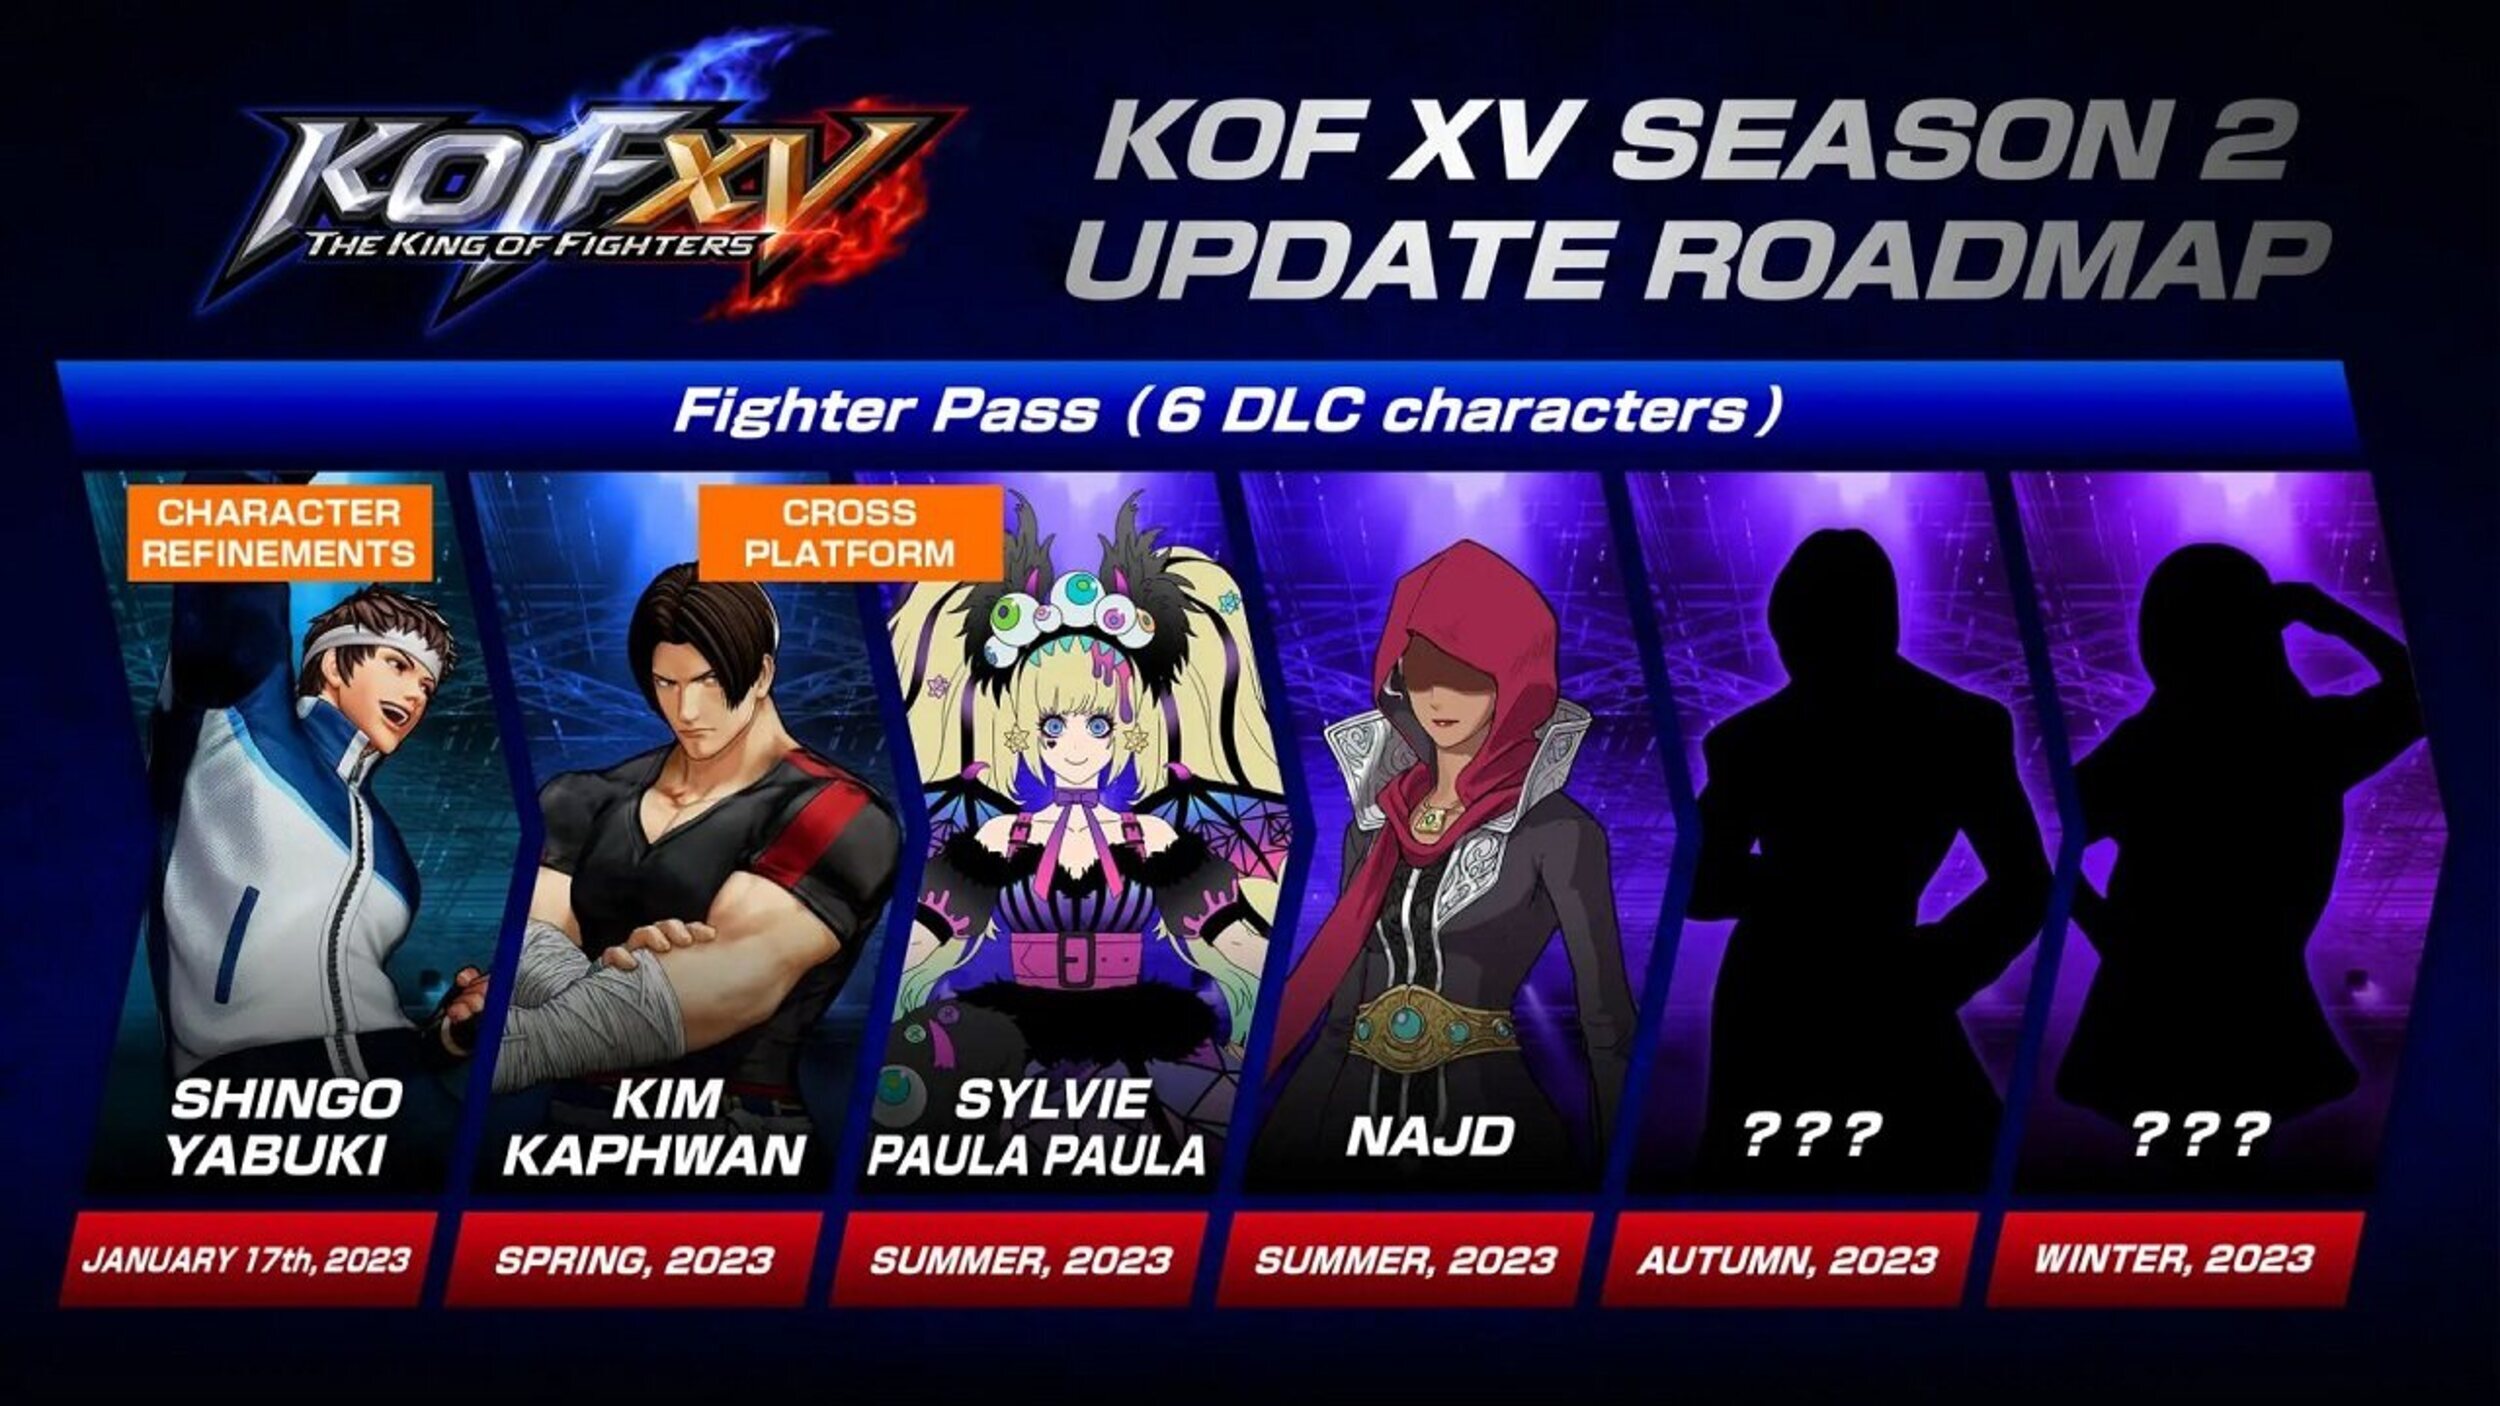 'The King of Fighters 15'